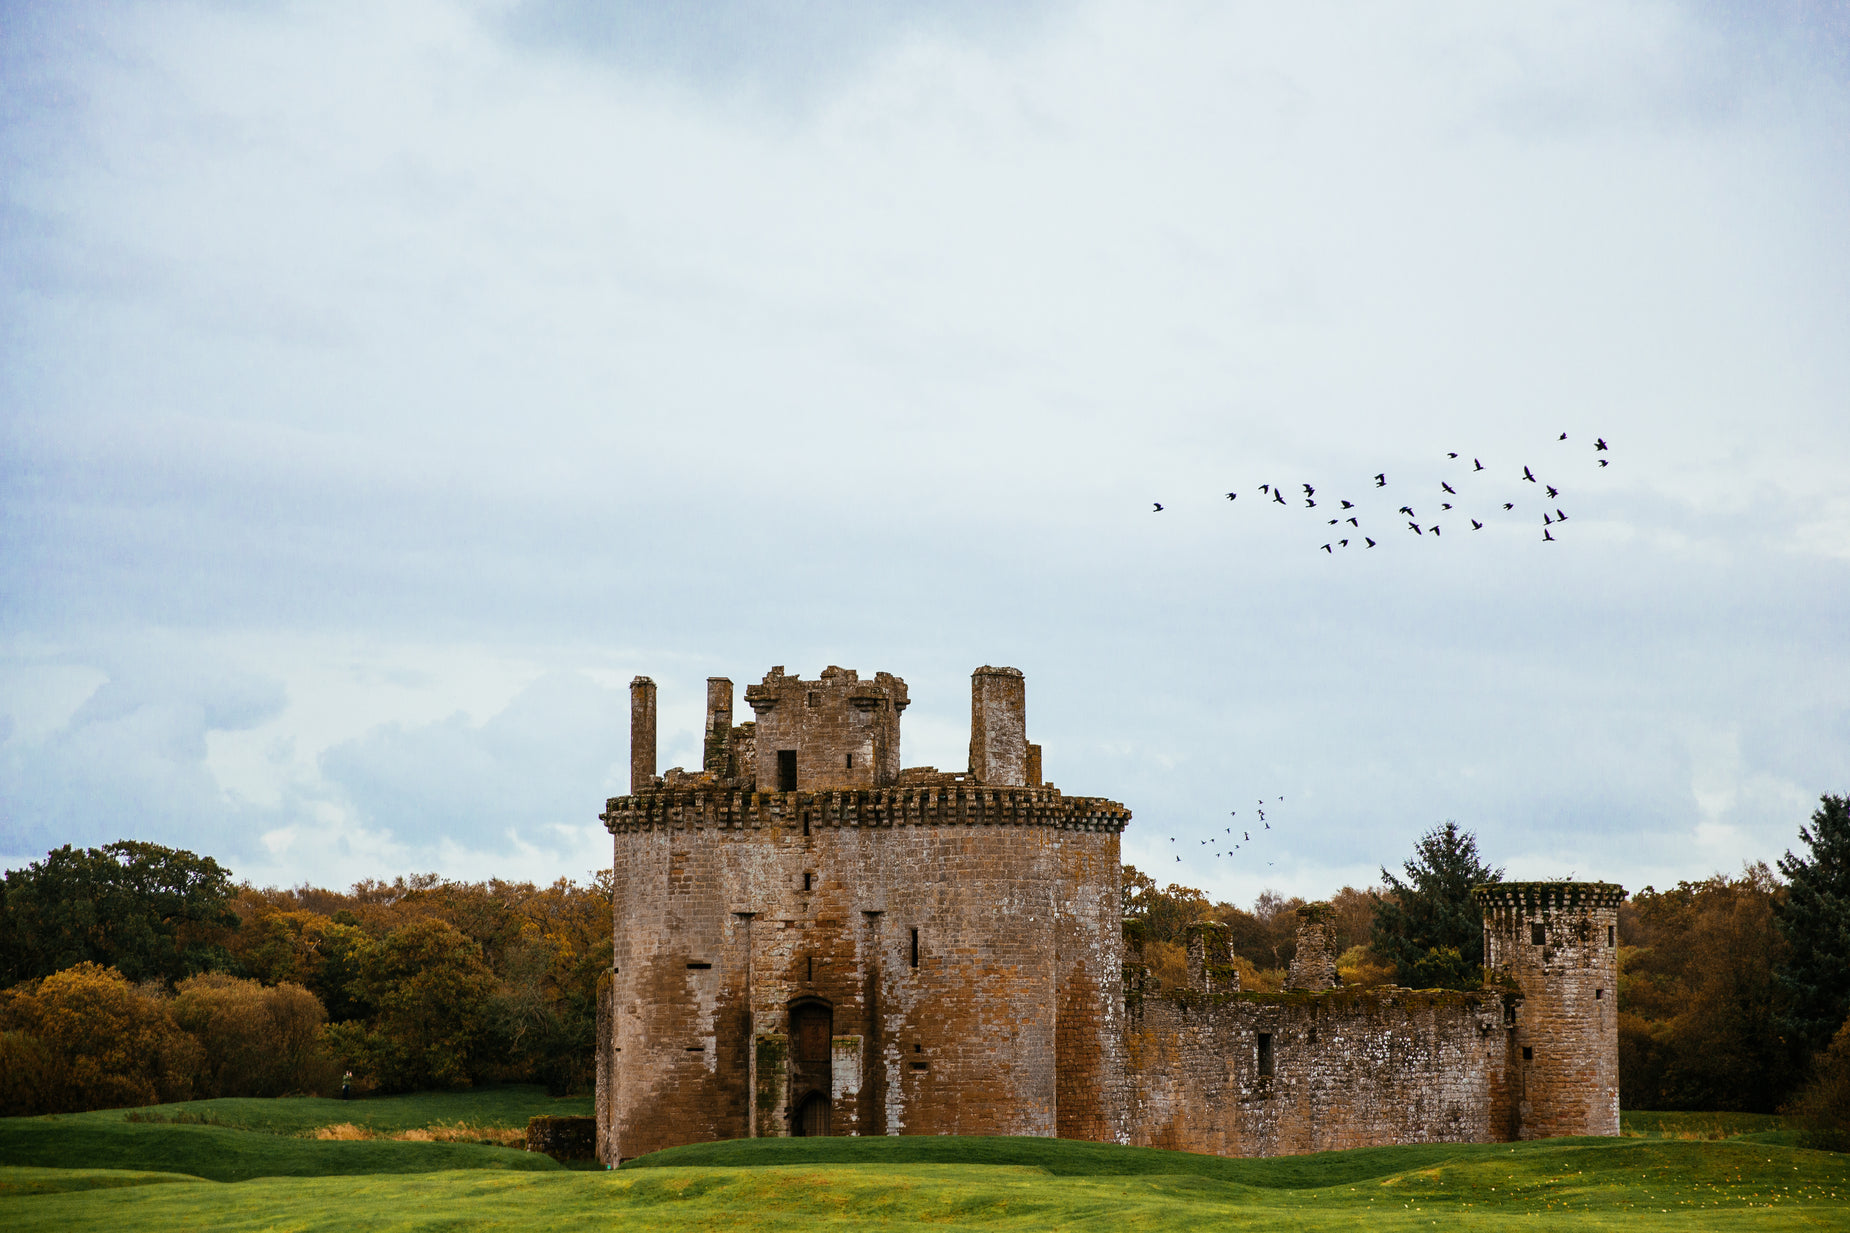 a bird flying in the air over a tall castle